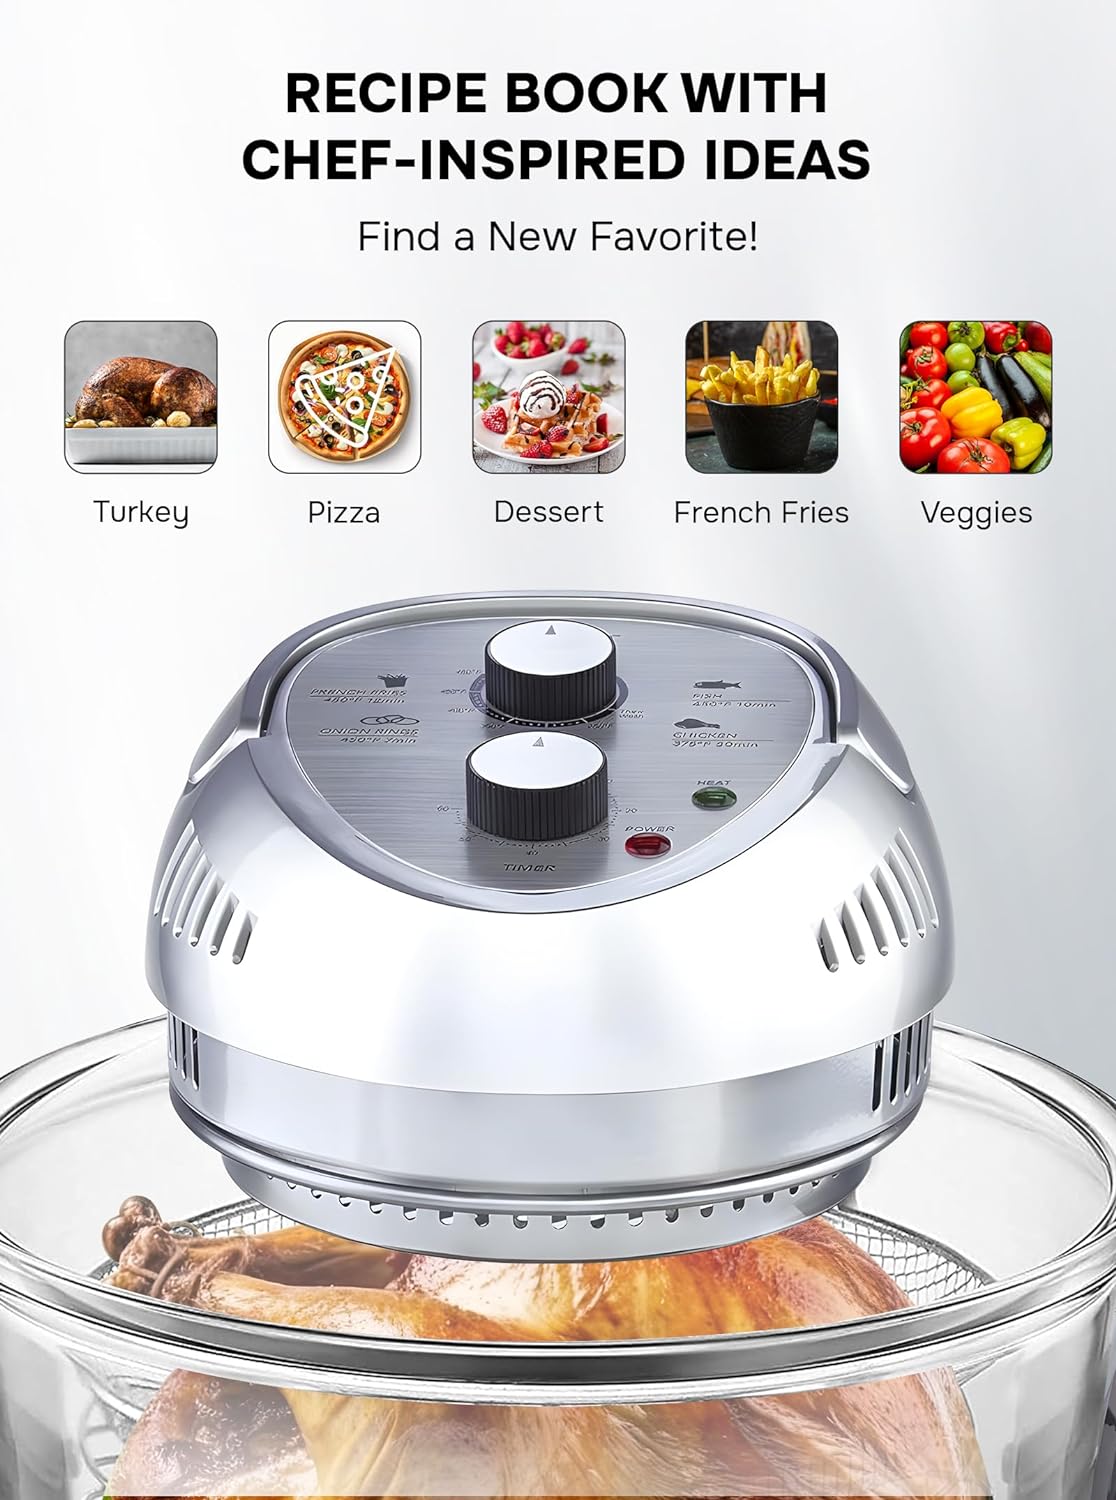 Big Boss 16-Quart Silver Air Fryer in the Air Fryers department at